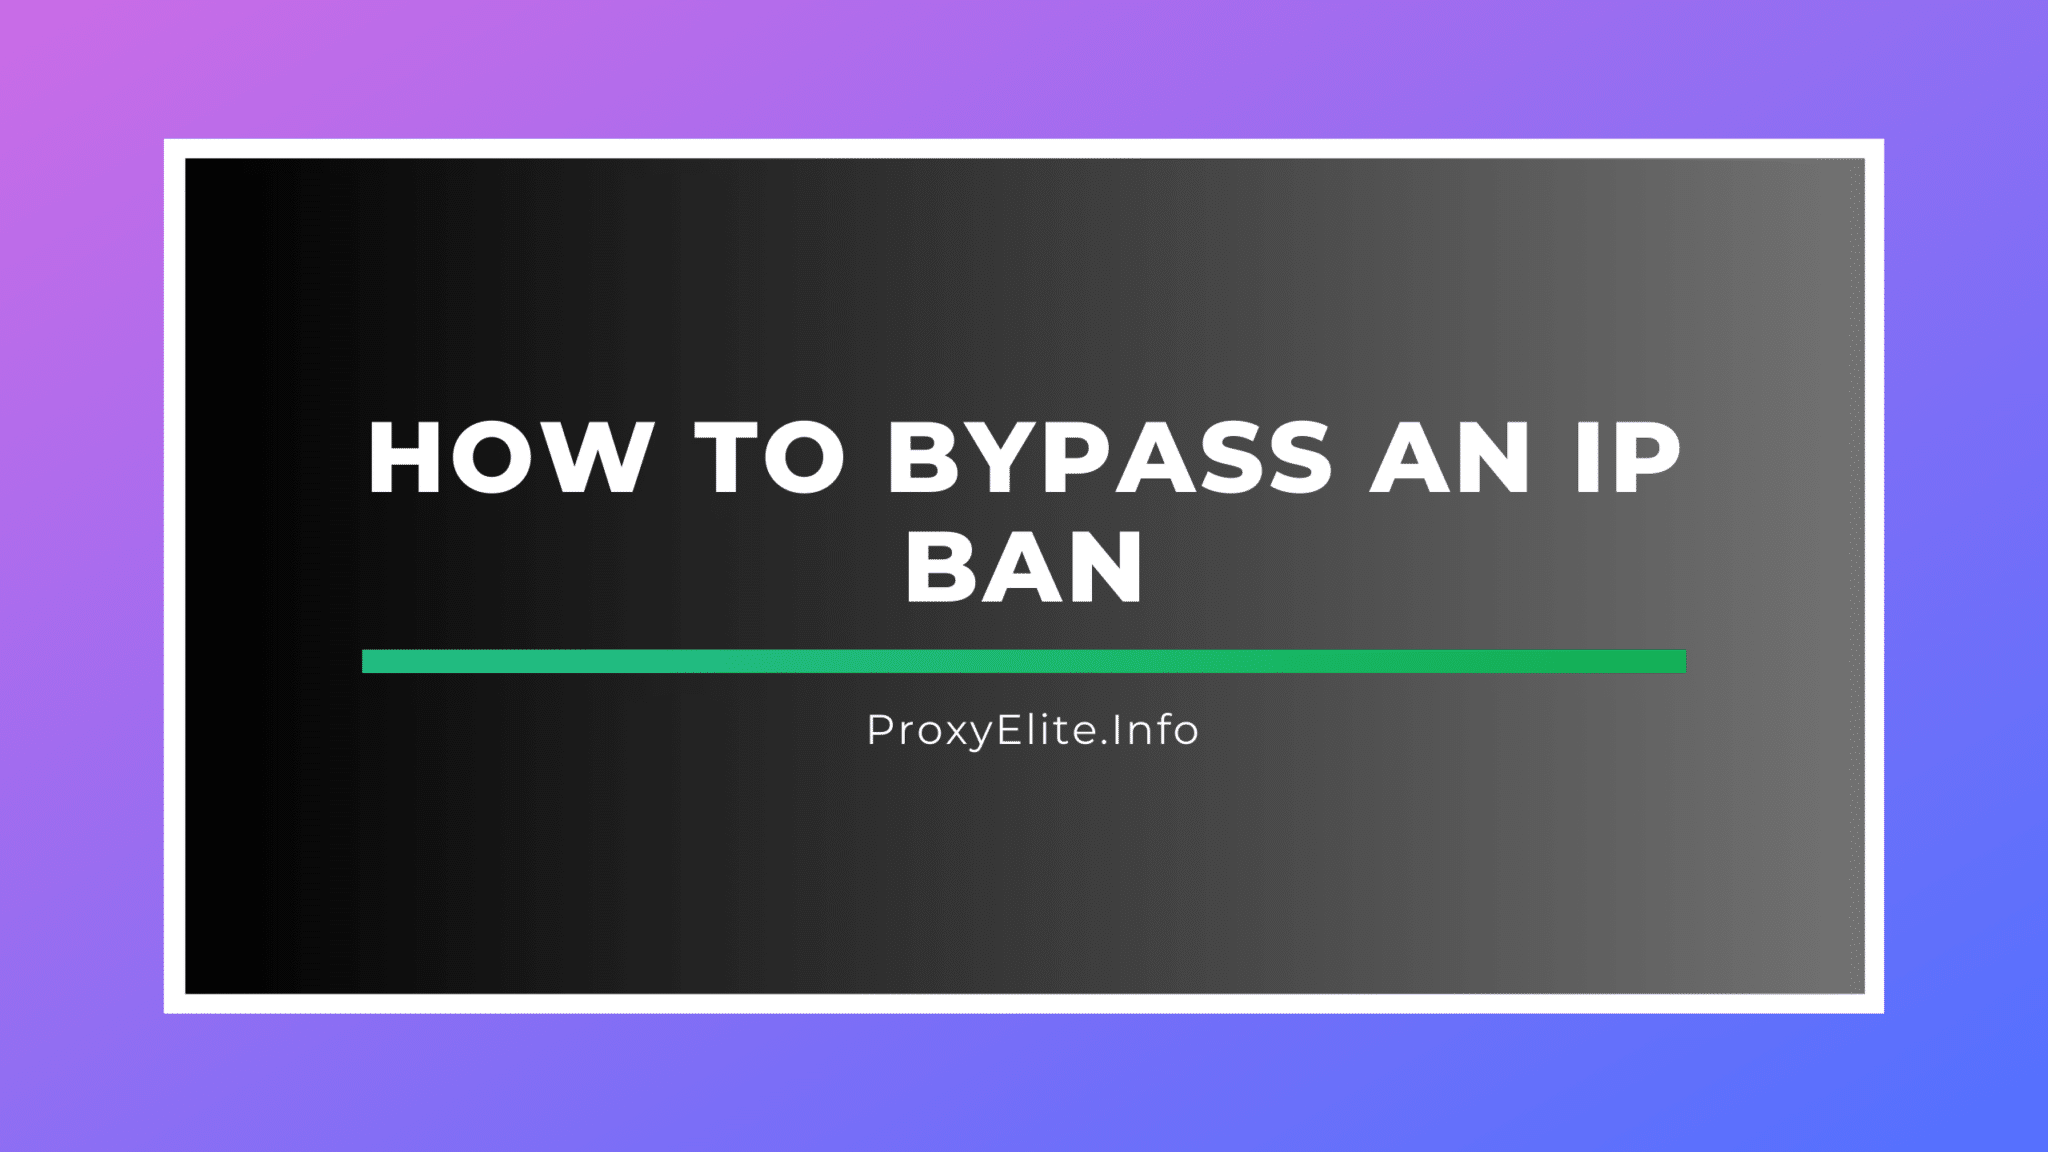 How to Bypass an IP Ban